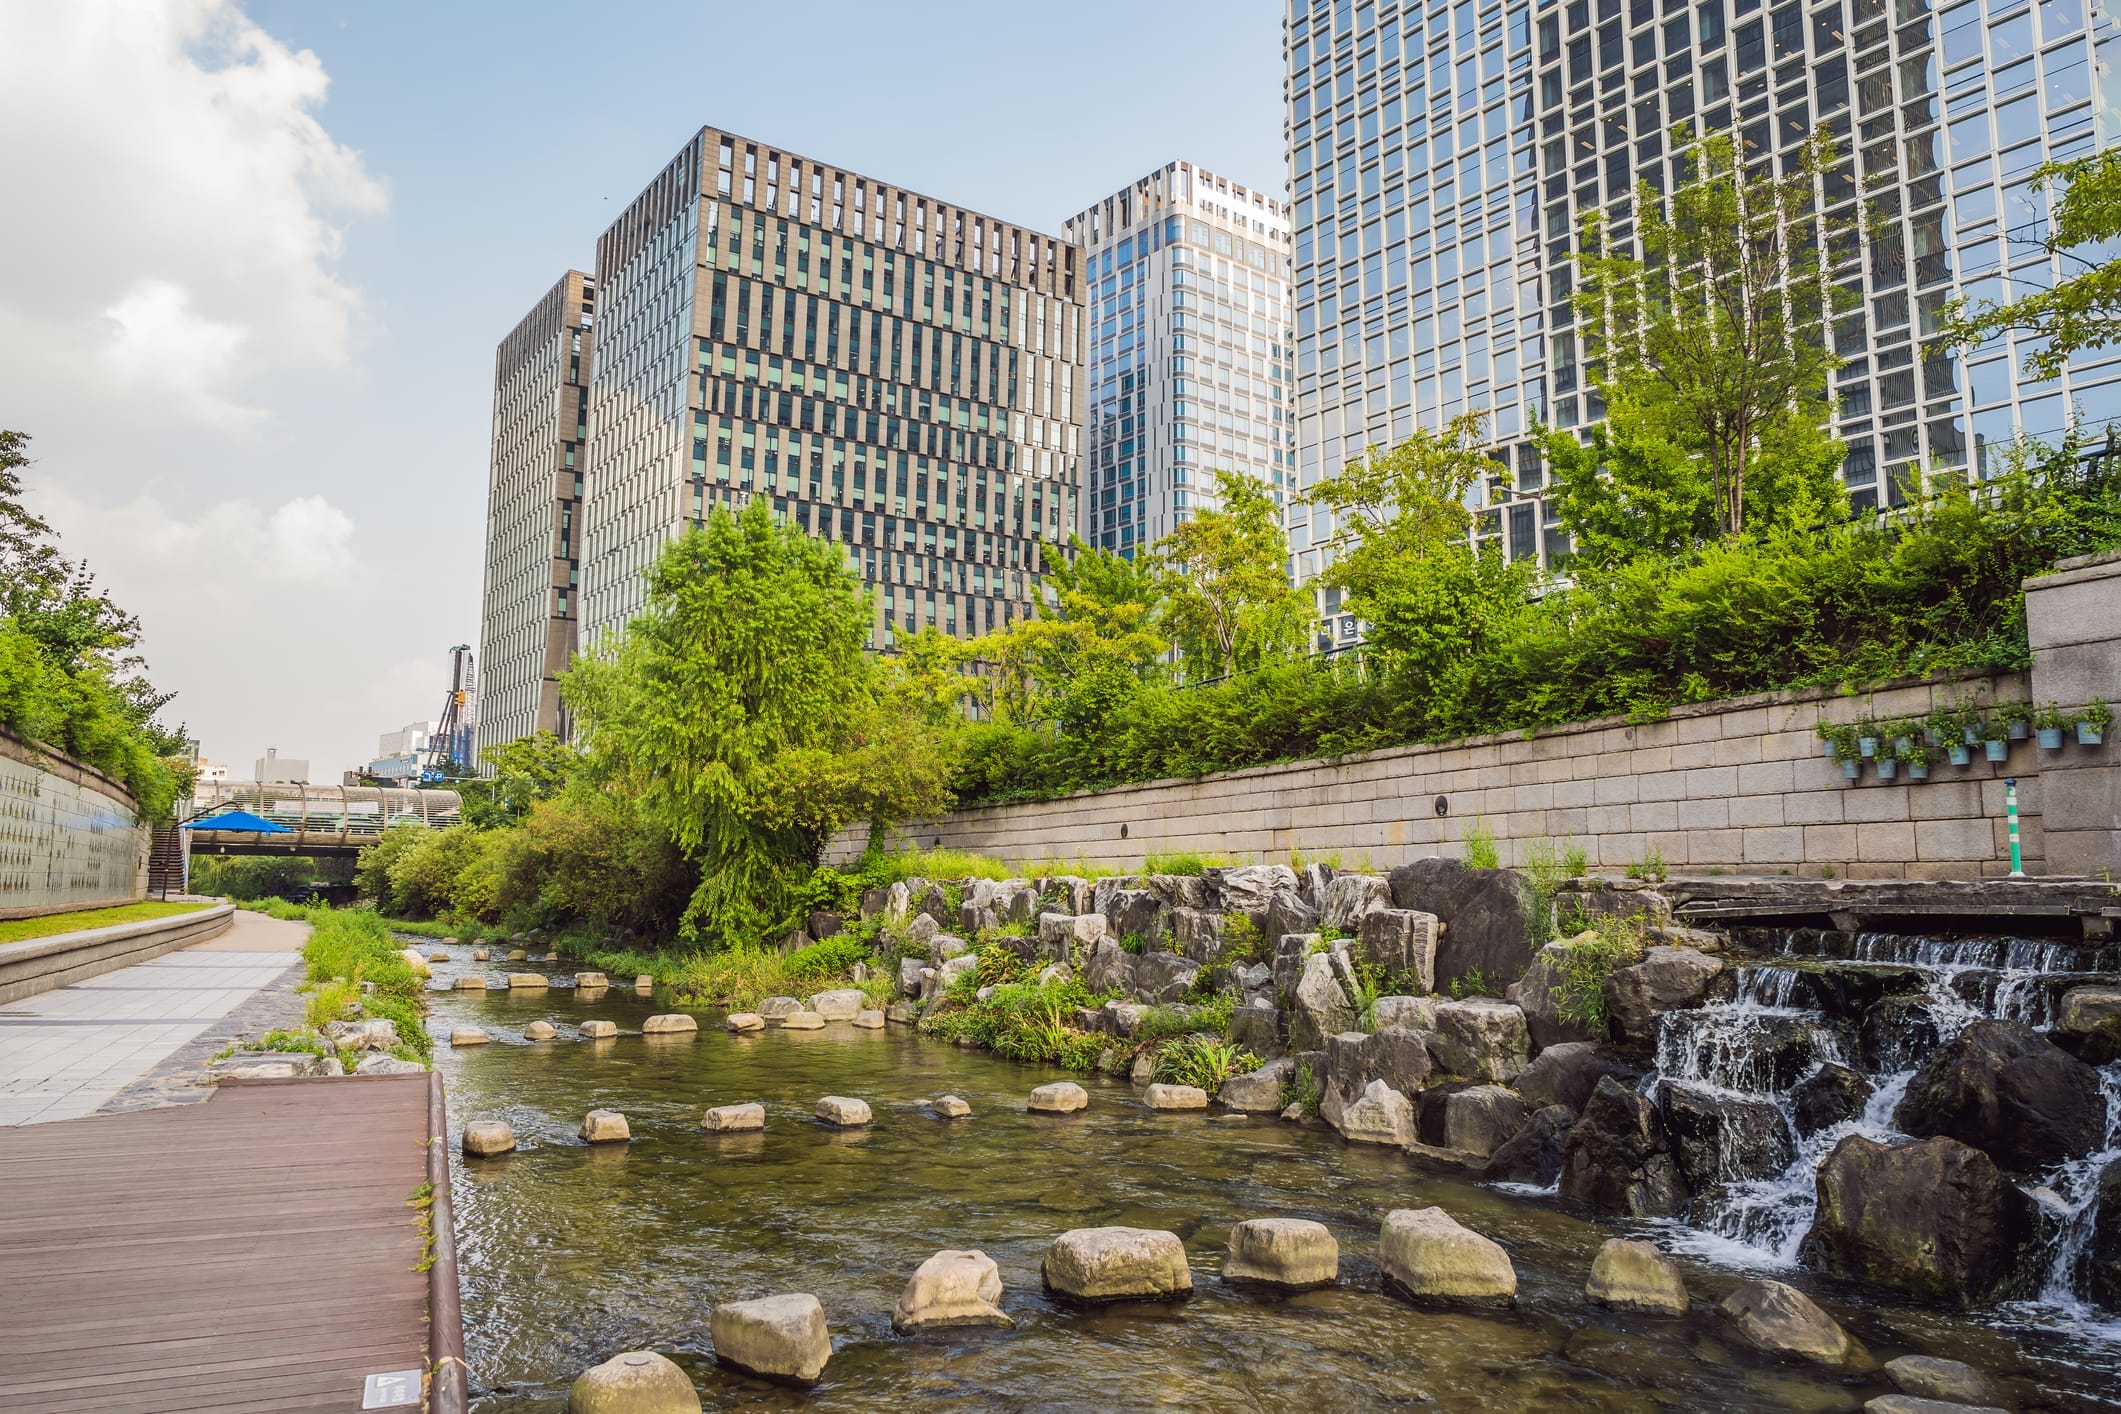 Summer Getaways in Seoul - 20+ Ways to Experience Nature in Seoul During Summer 26